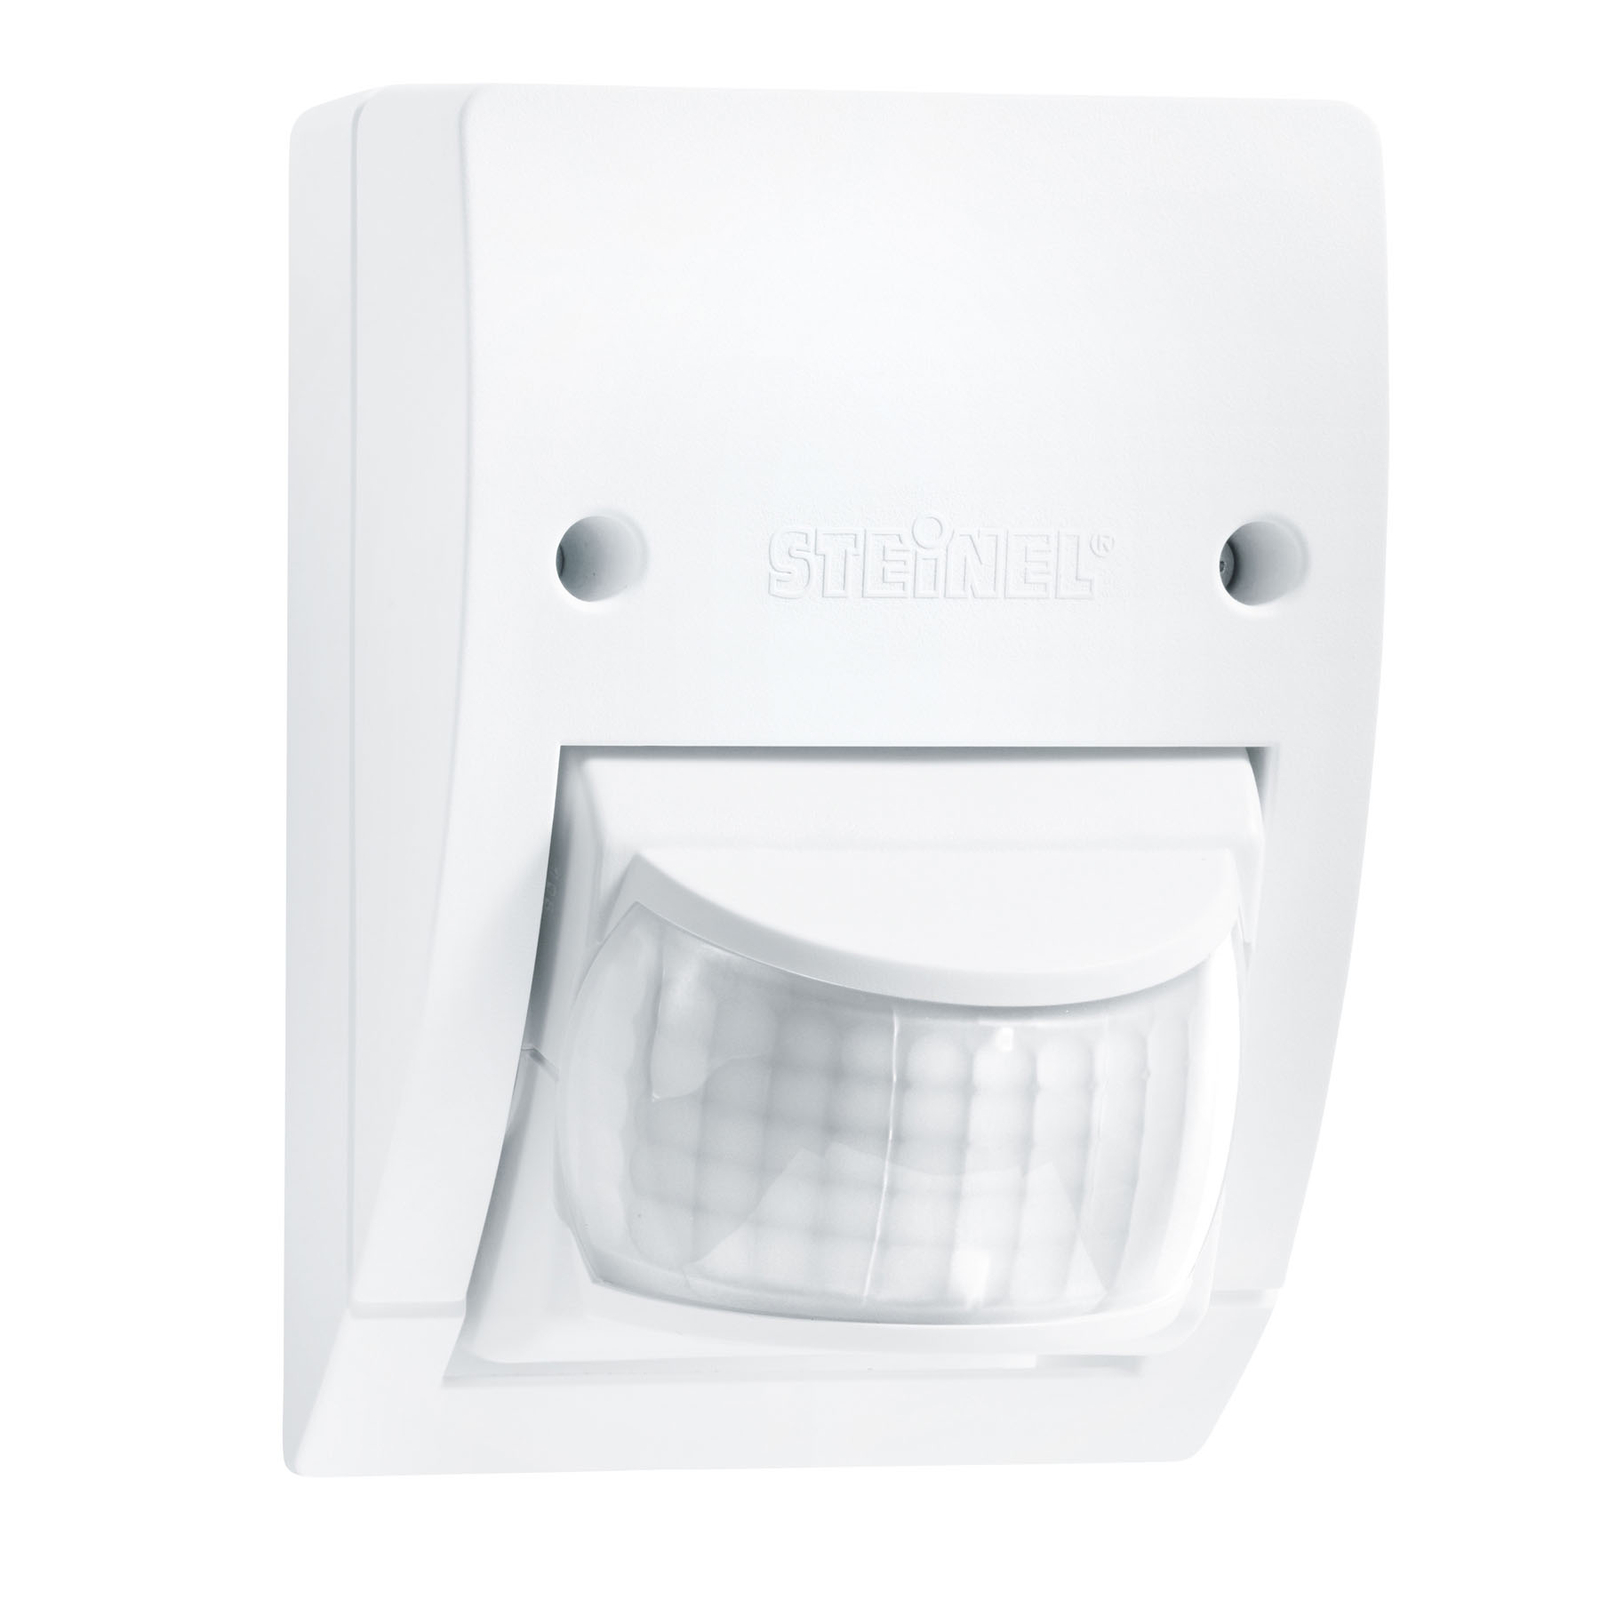 STEINEL IS 2160 ECO infra-red wall sensor white